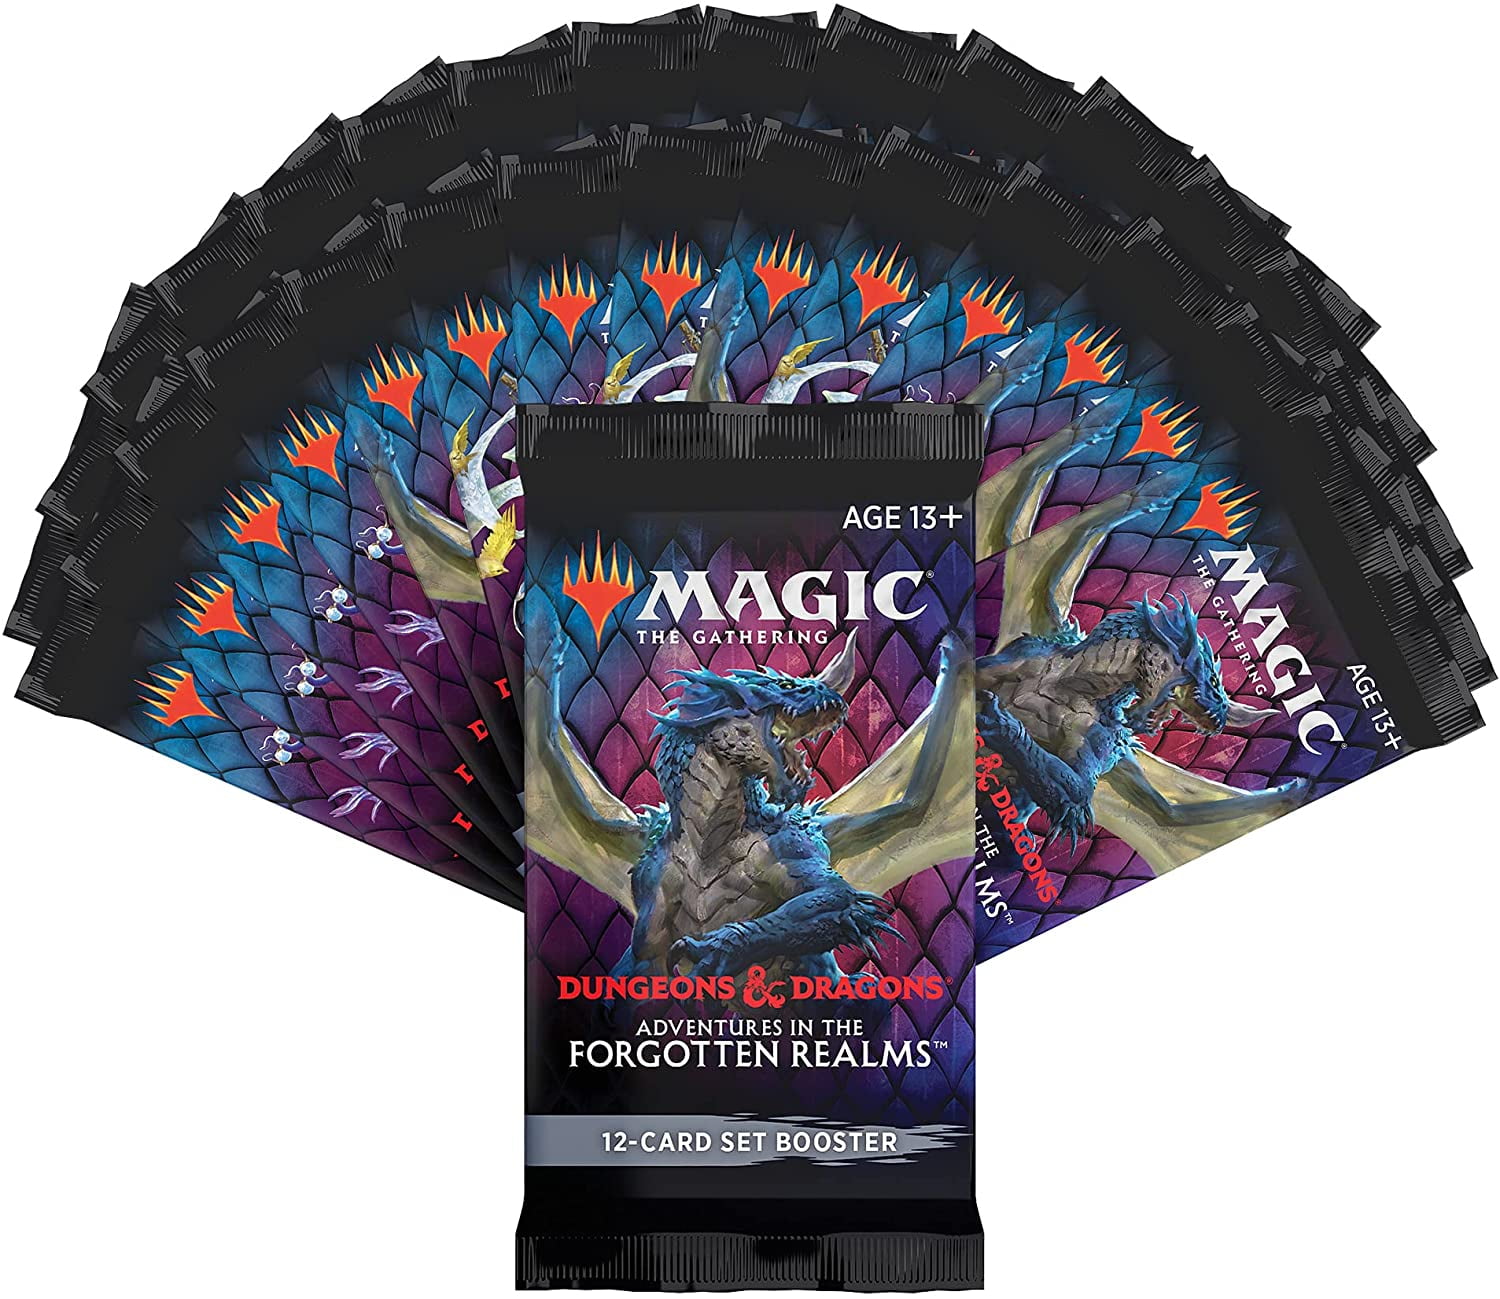 Grand Master of Flowers - Foil - Magic Singles » Adventures in the  Forgotten Realms - Set » Adventures in the Forgotten Realms -  TrollTraderCards